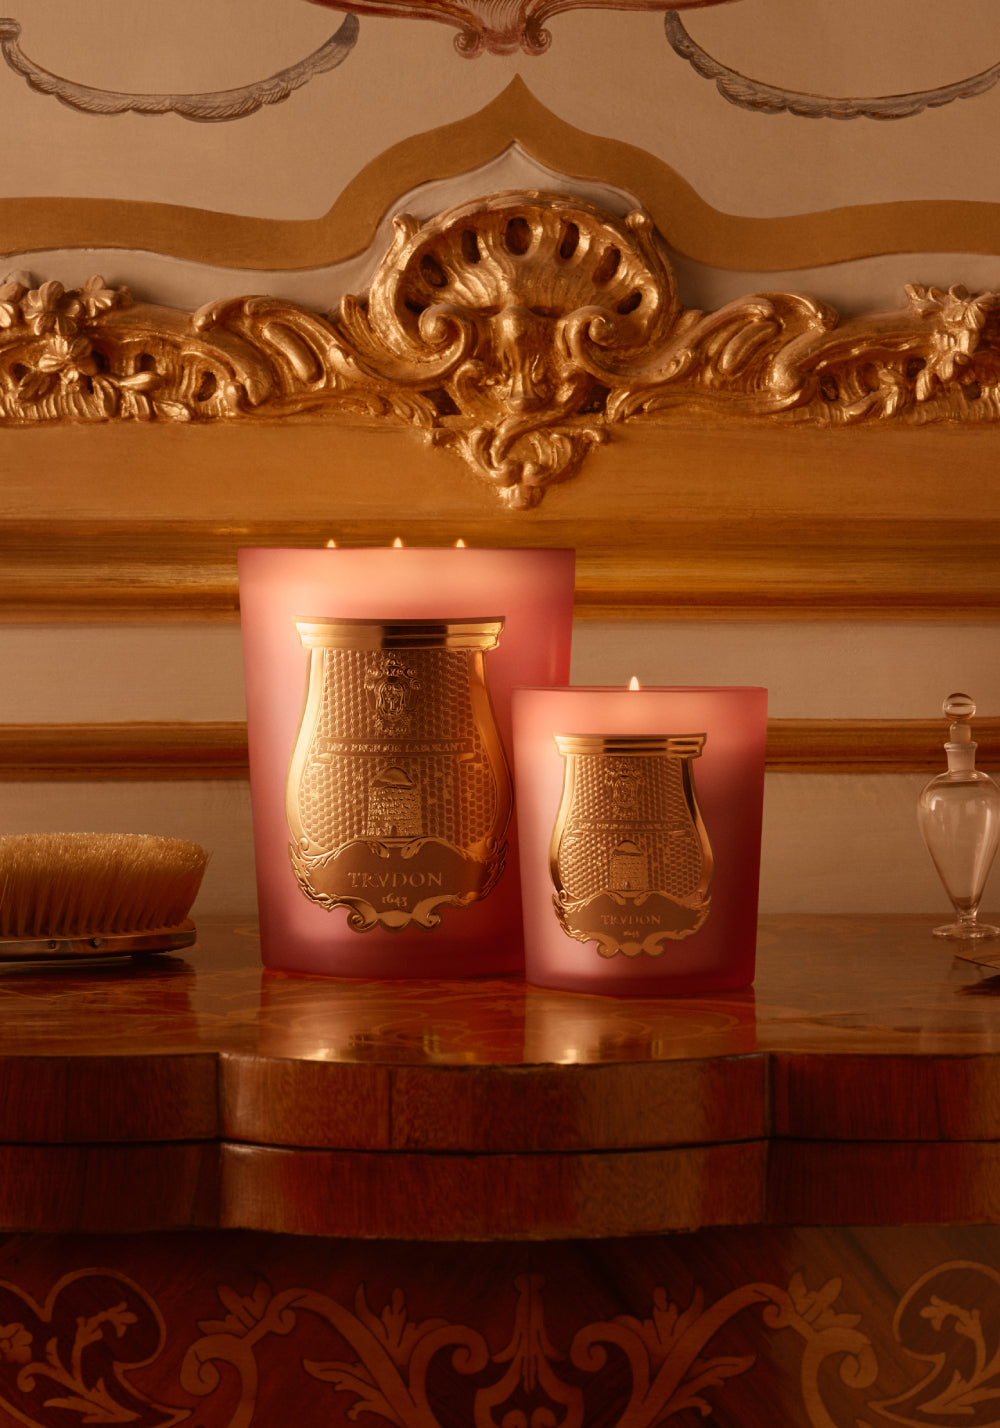 CIRE TRUDON CANDLE 800g TUILERIES